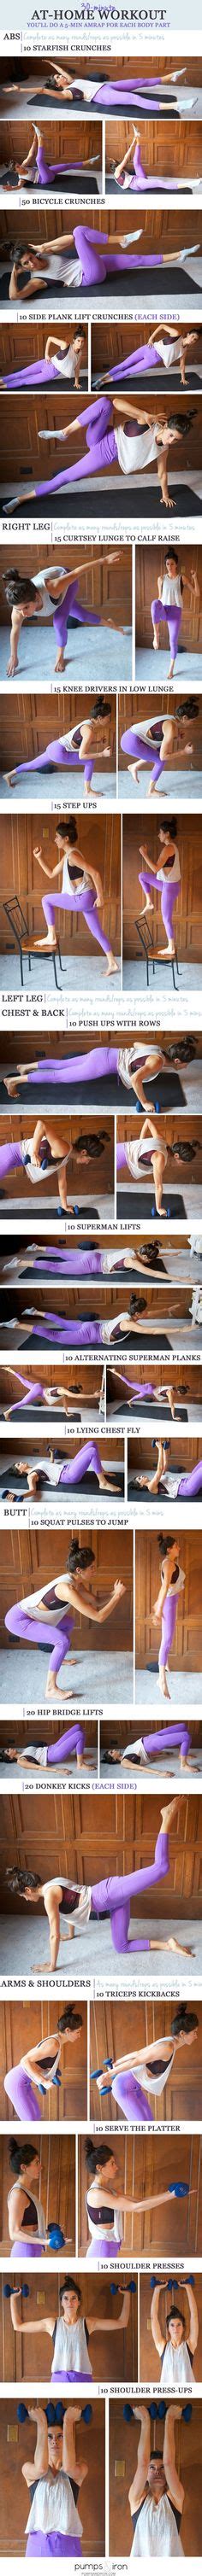 9 Home Workout Ideas Workout Fitness Body At Home Workouts